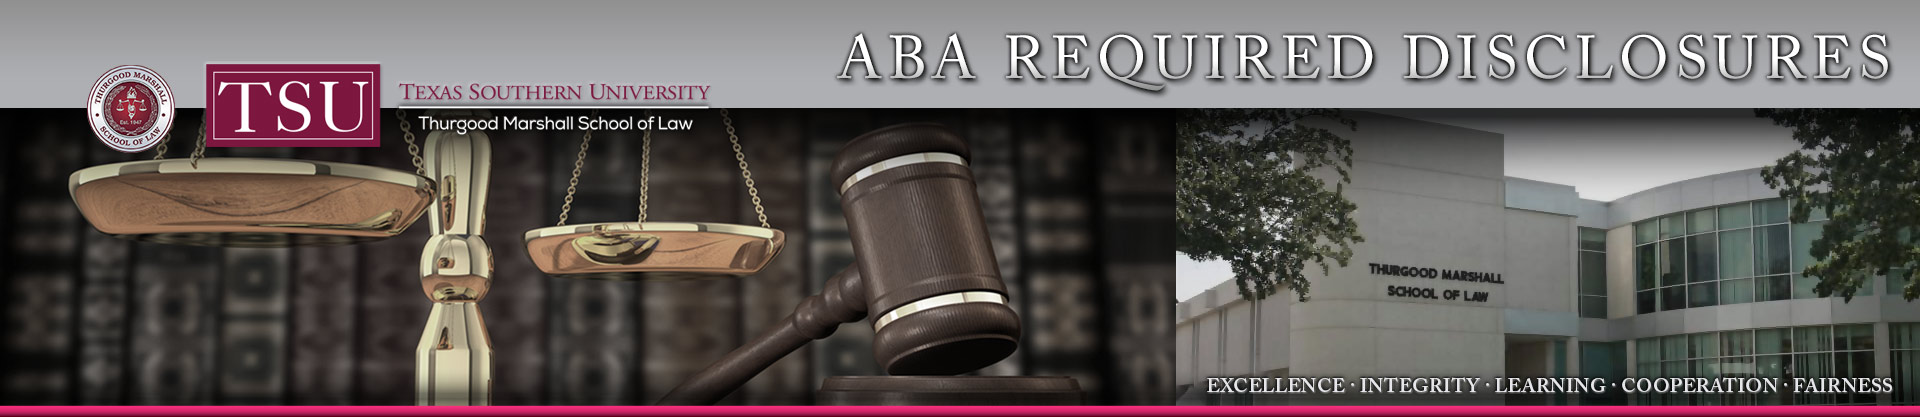 ABA Required Disclosures